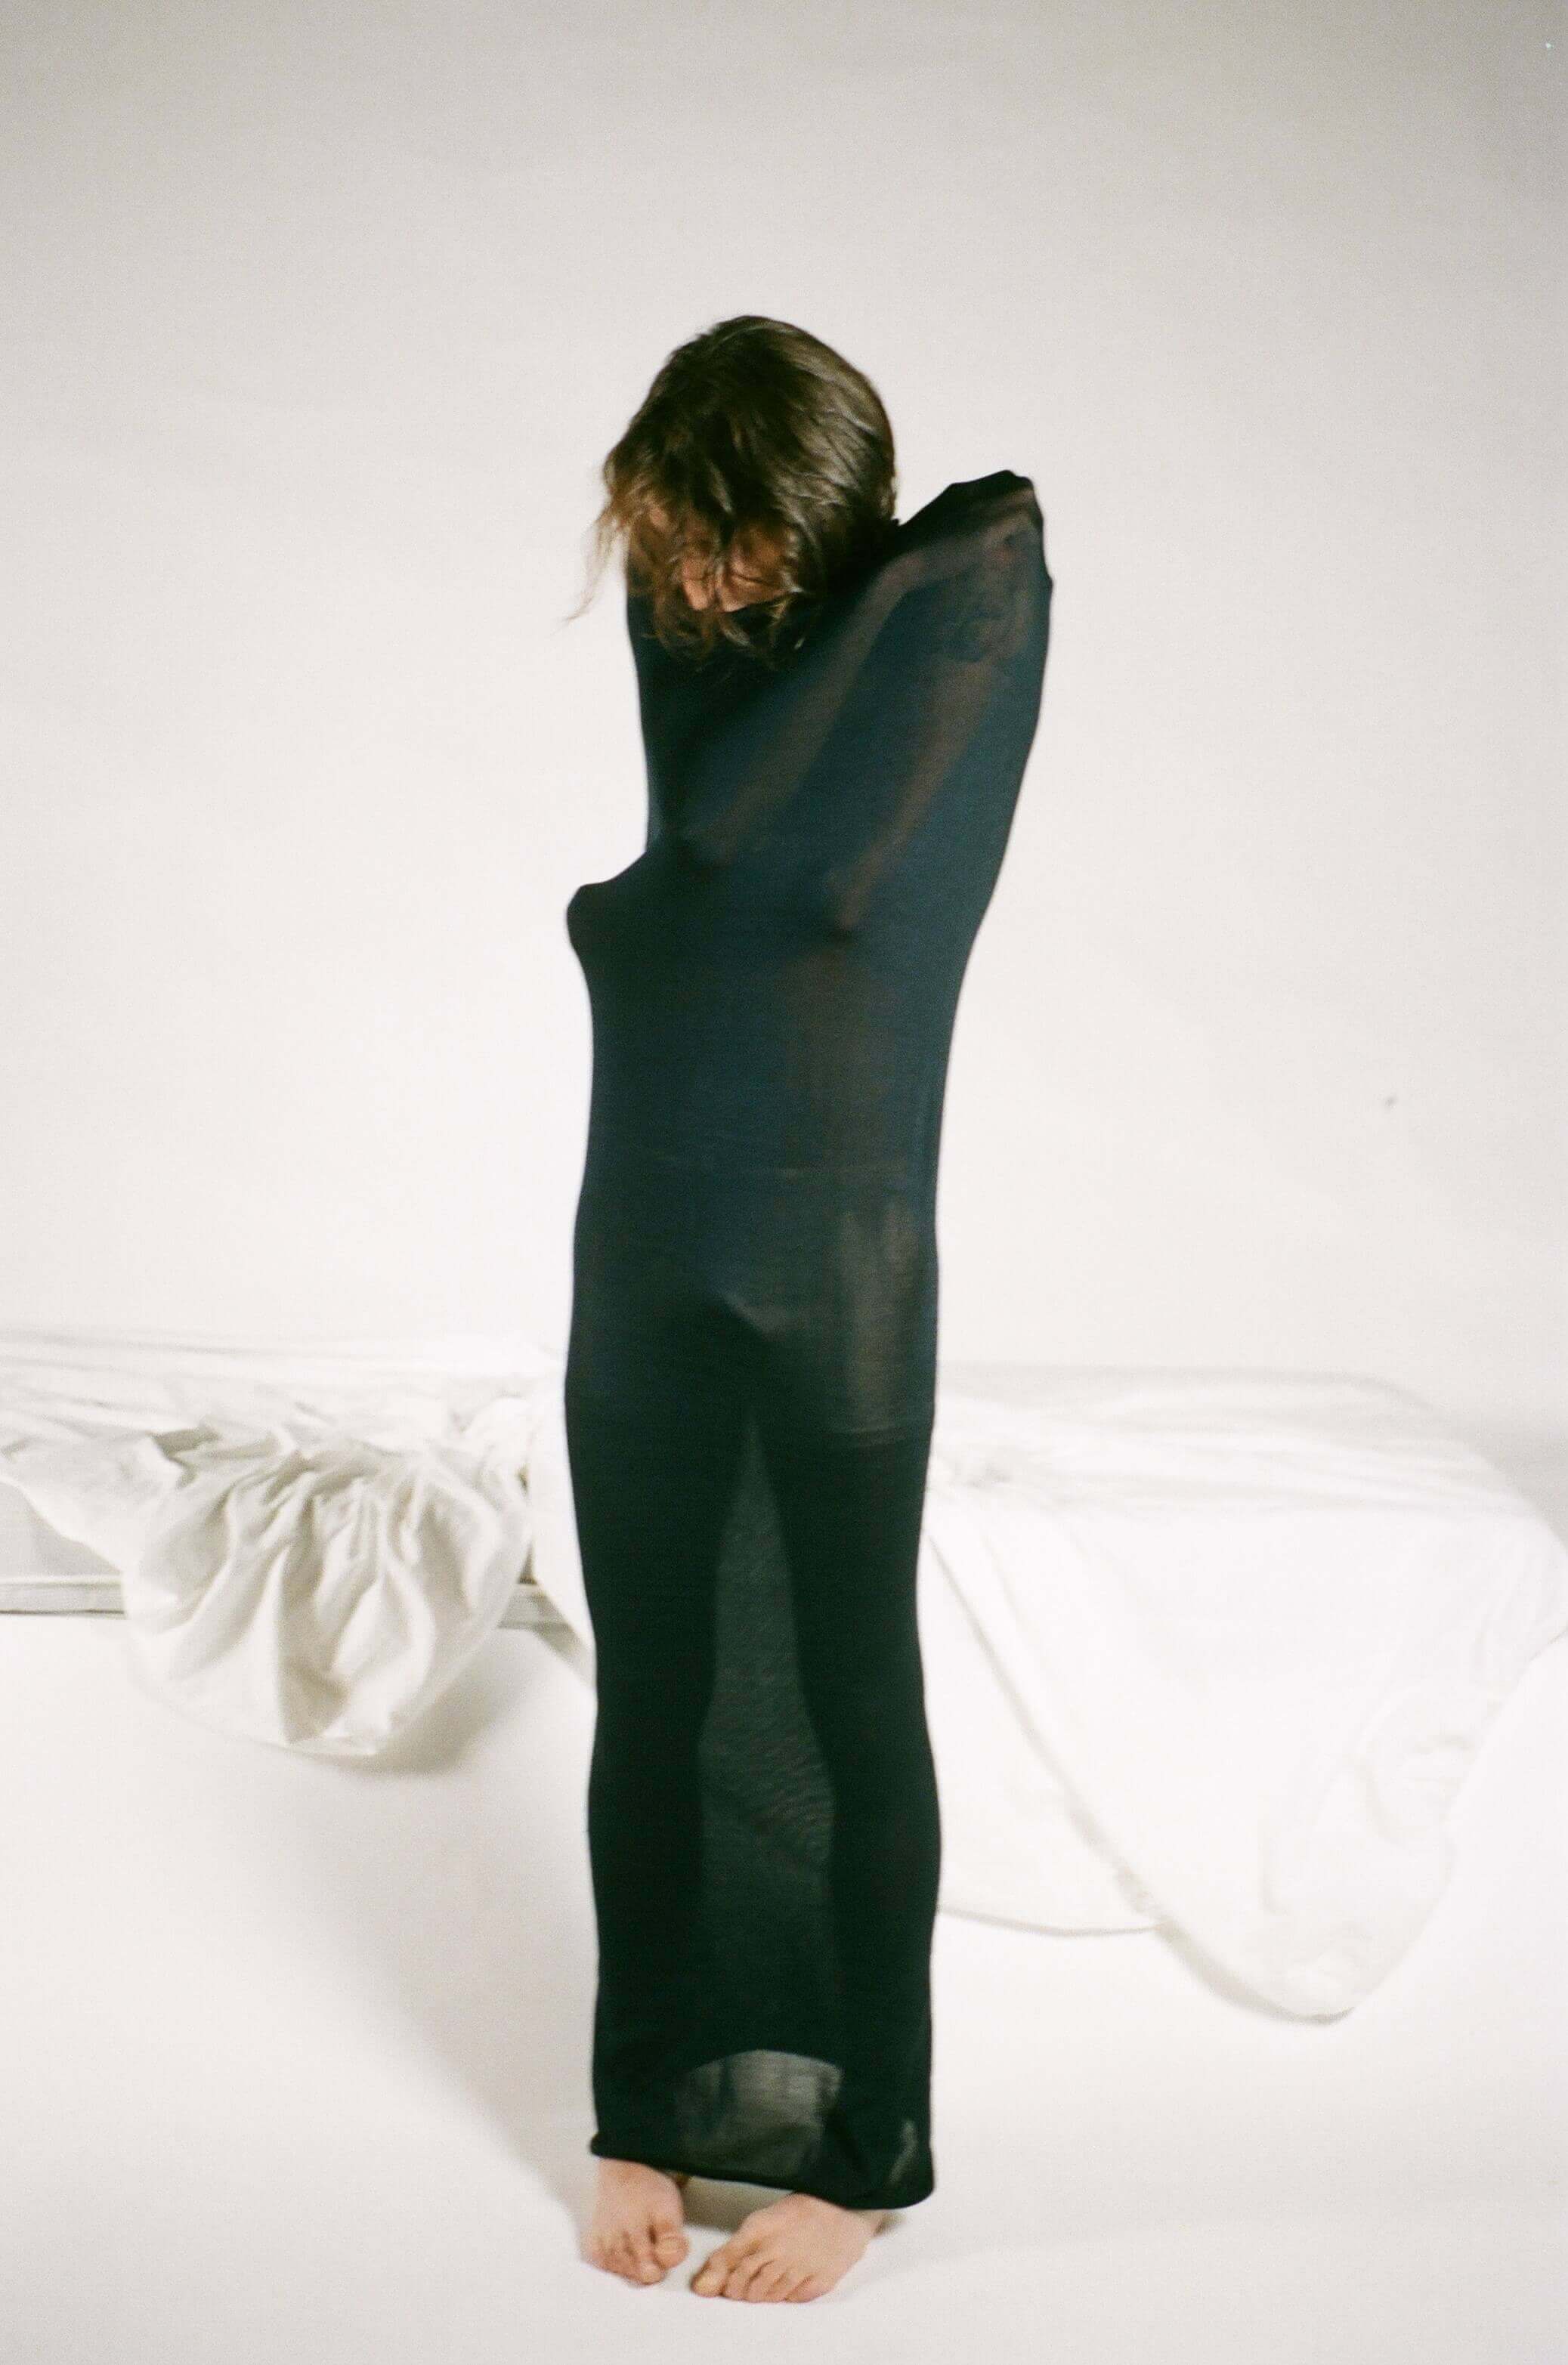 Model wrapped in semi transparent black cloth, standing and hugging themselves